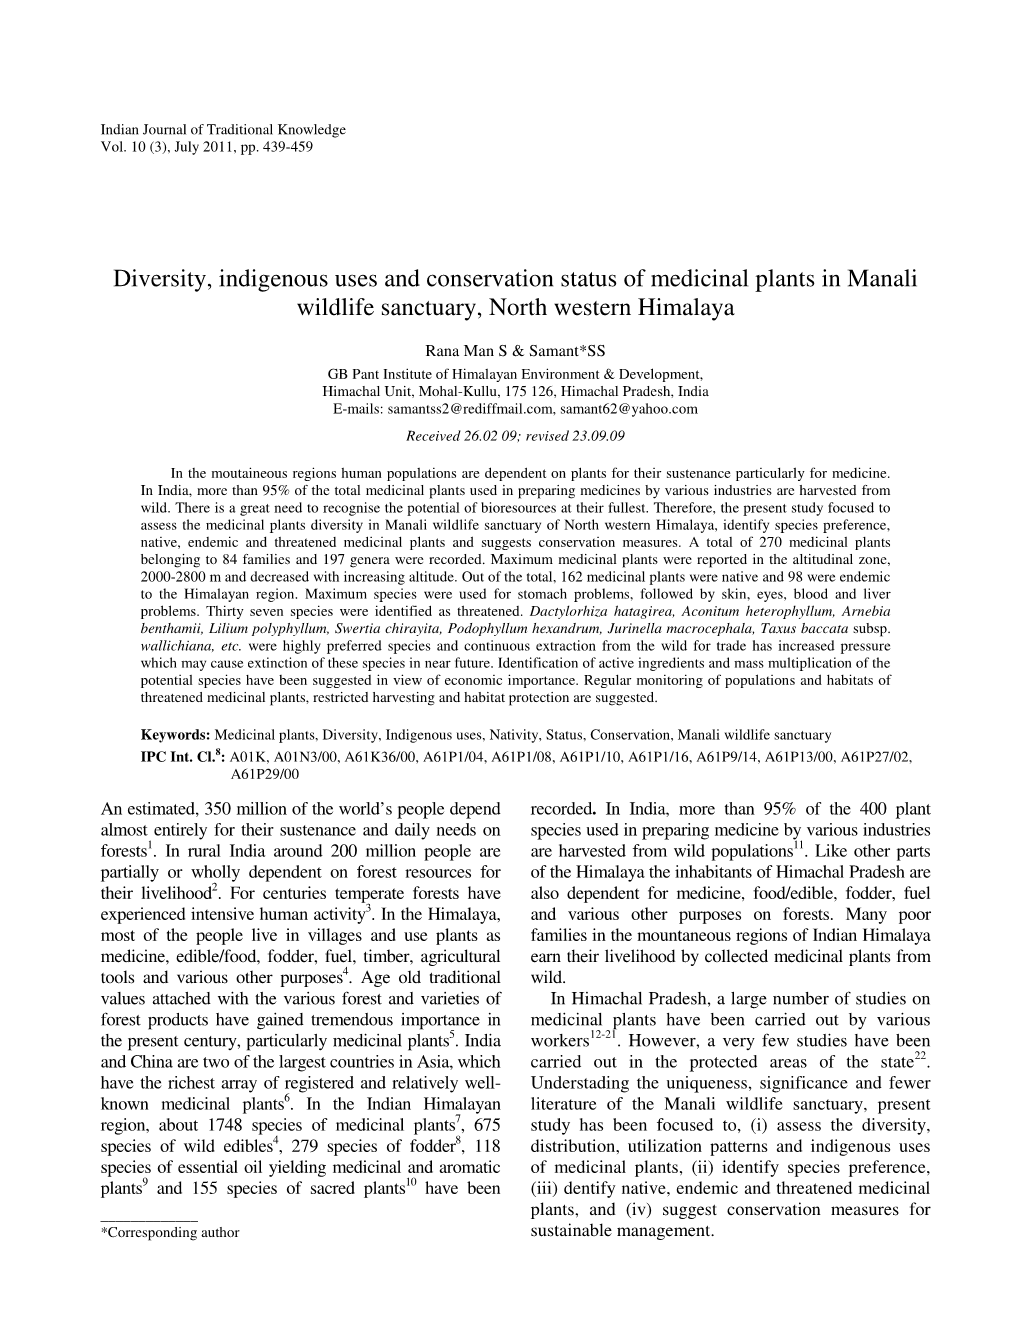 Diversity, Indigenous Uses and Conservation Status of Medicinal Plants in Manali Wildlife Sanctuary, North Western Himalaya